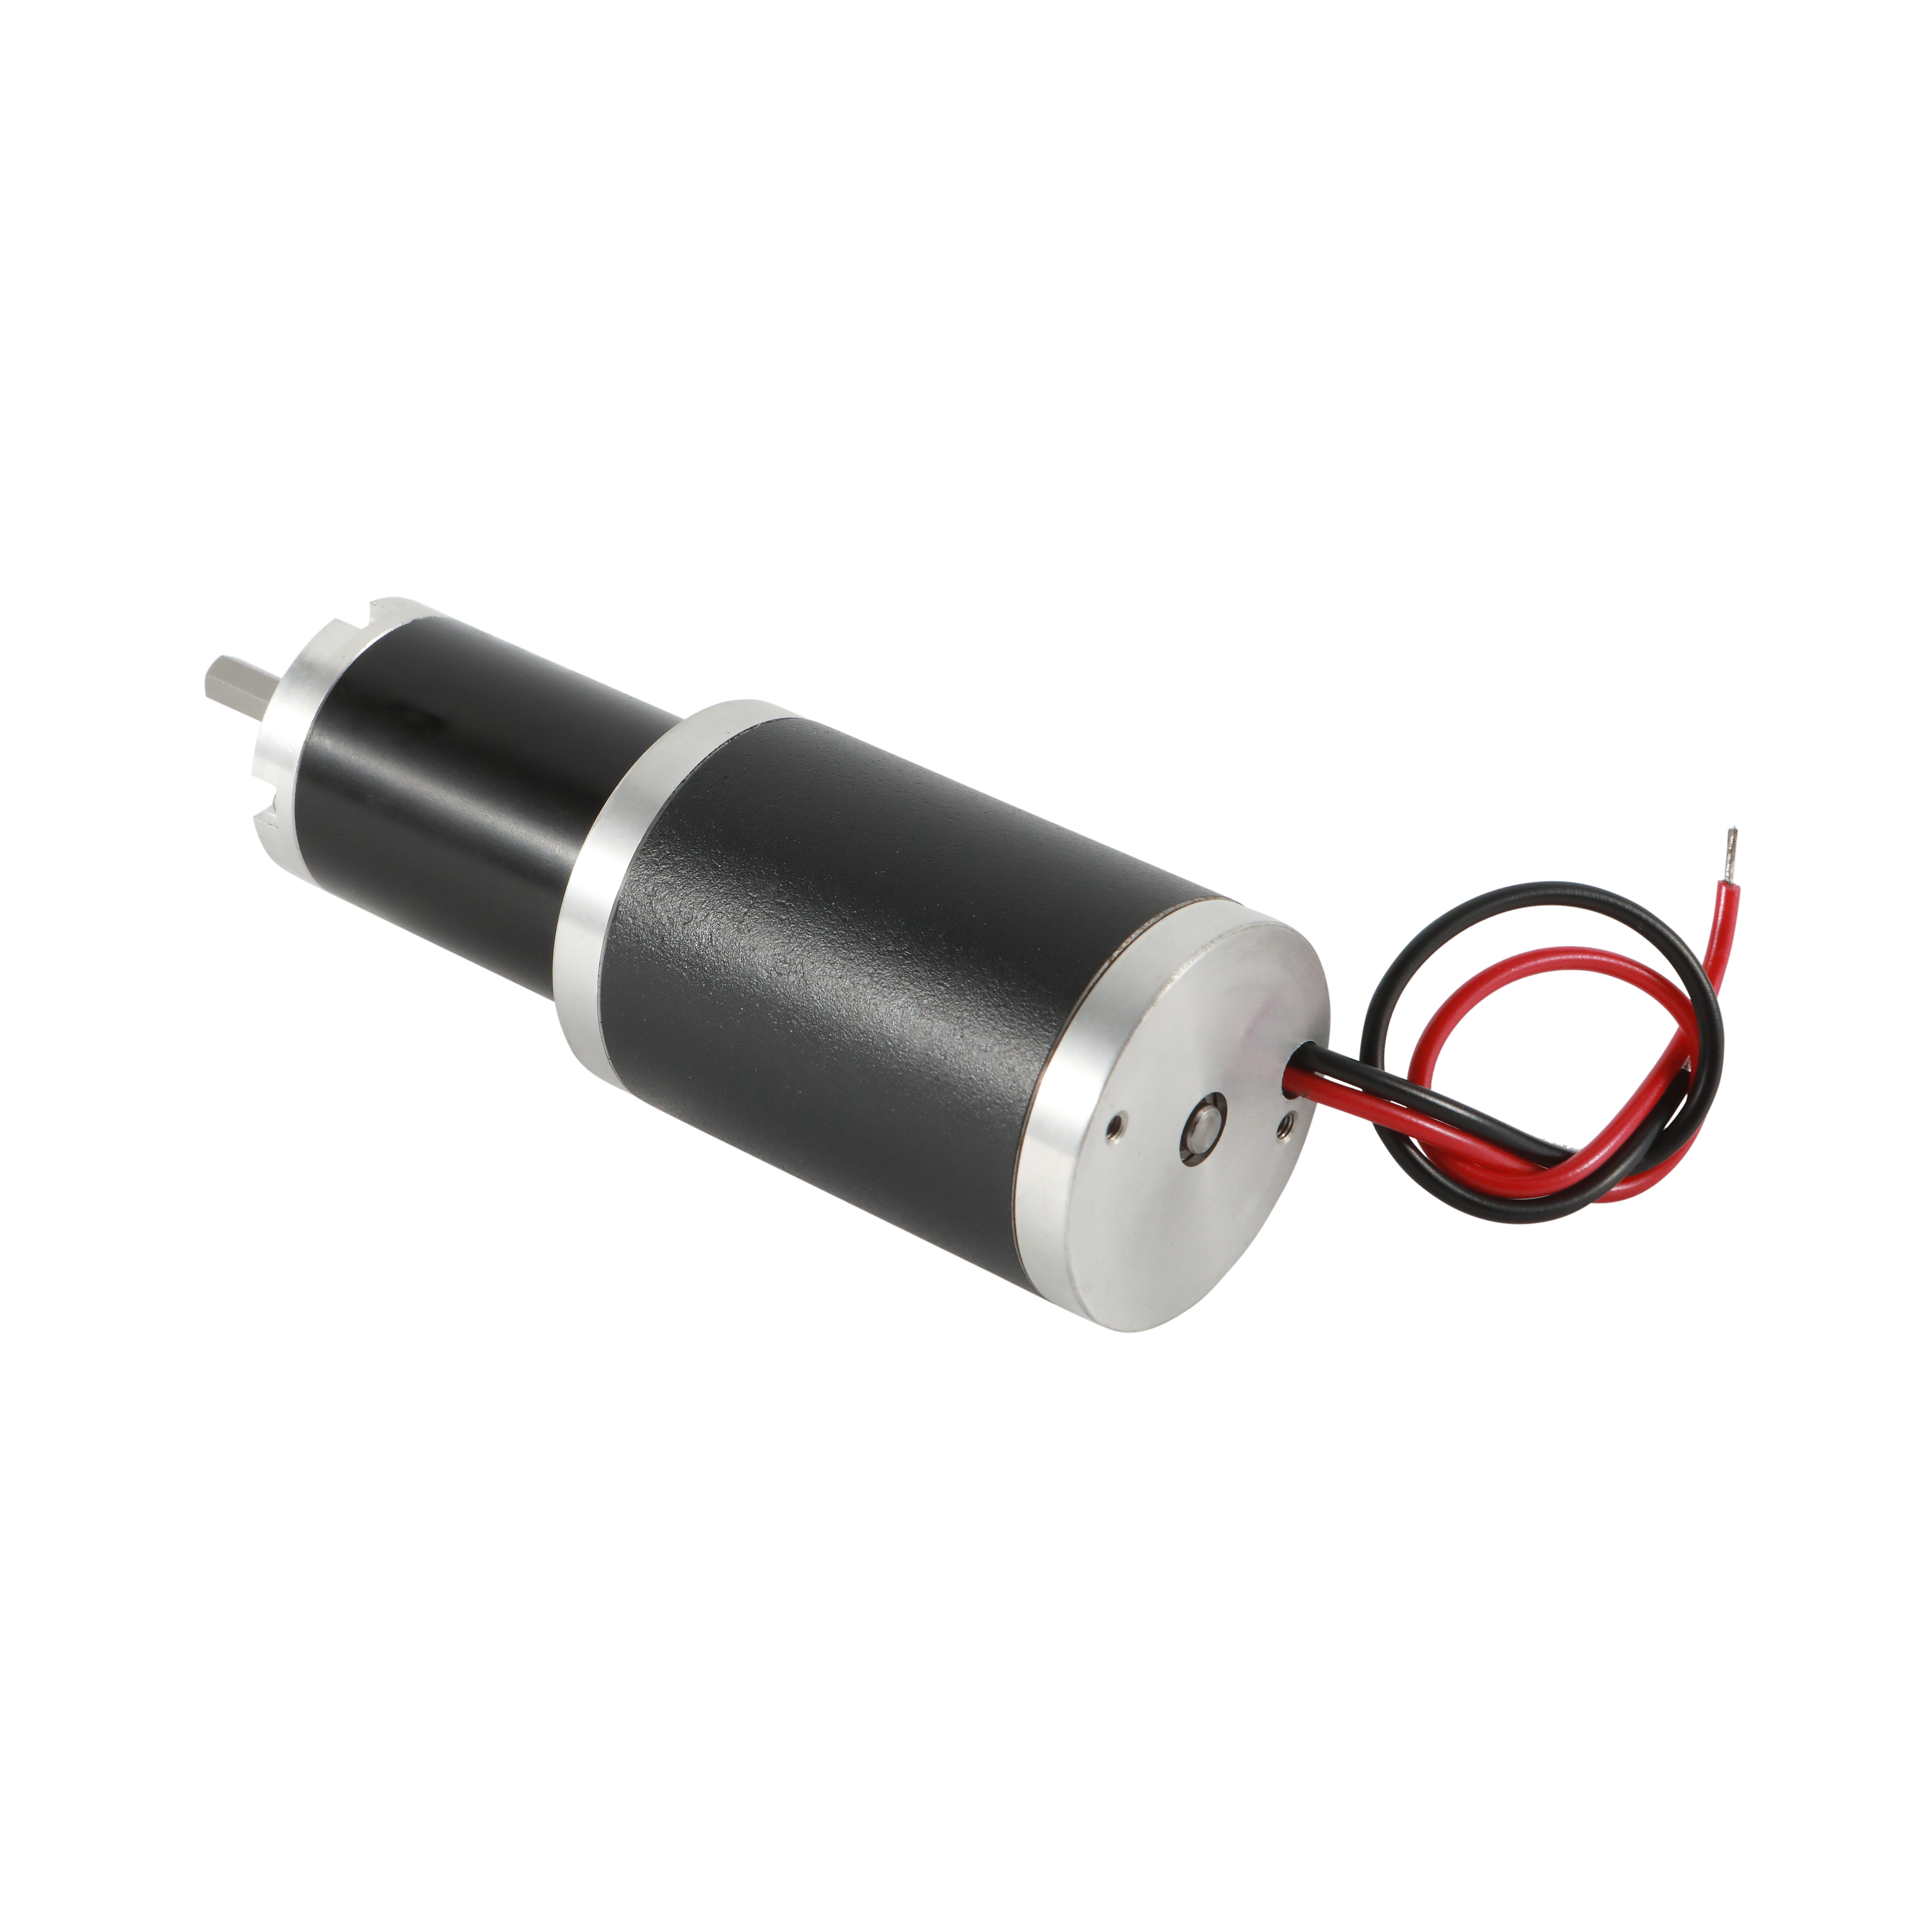 Automatic Awning Planet Gear Motor